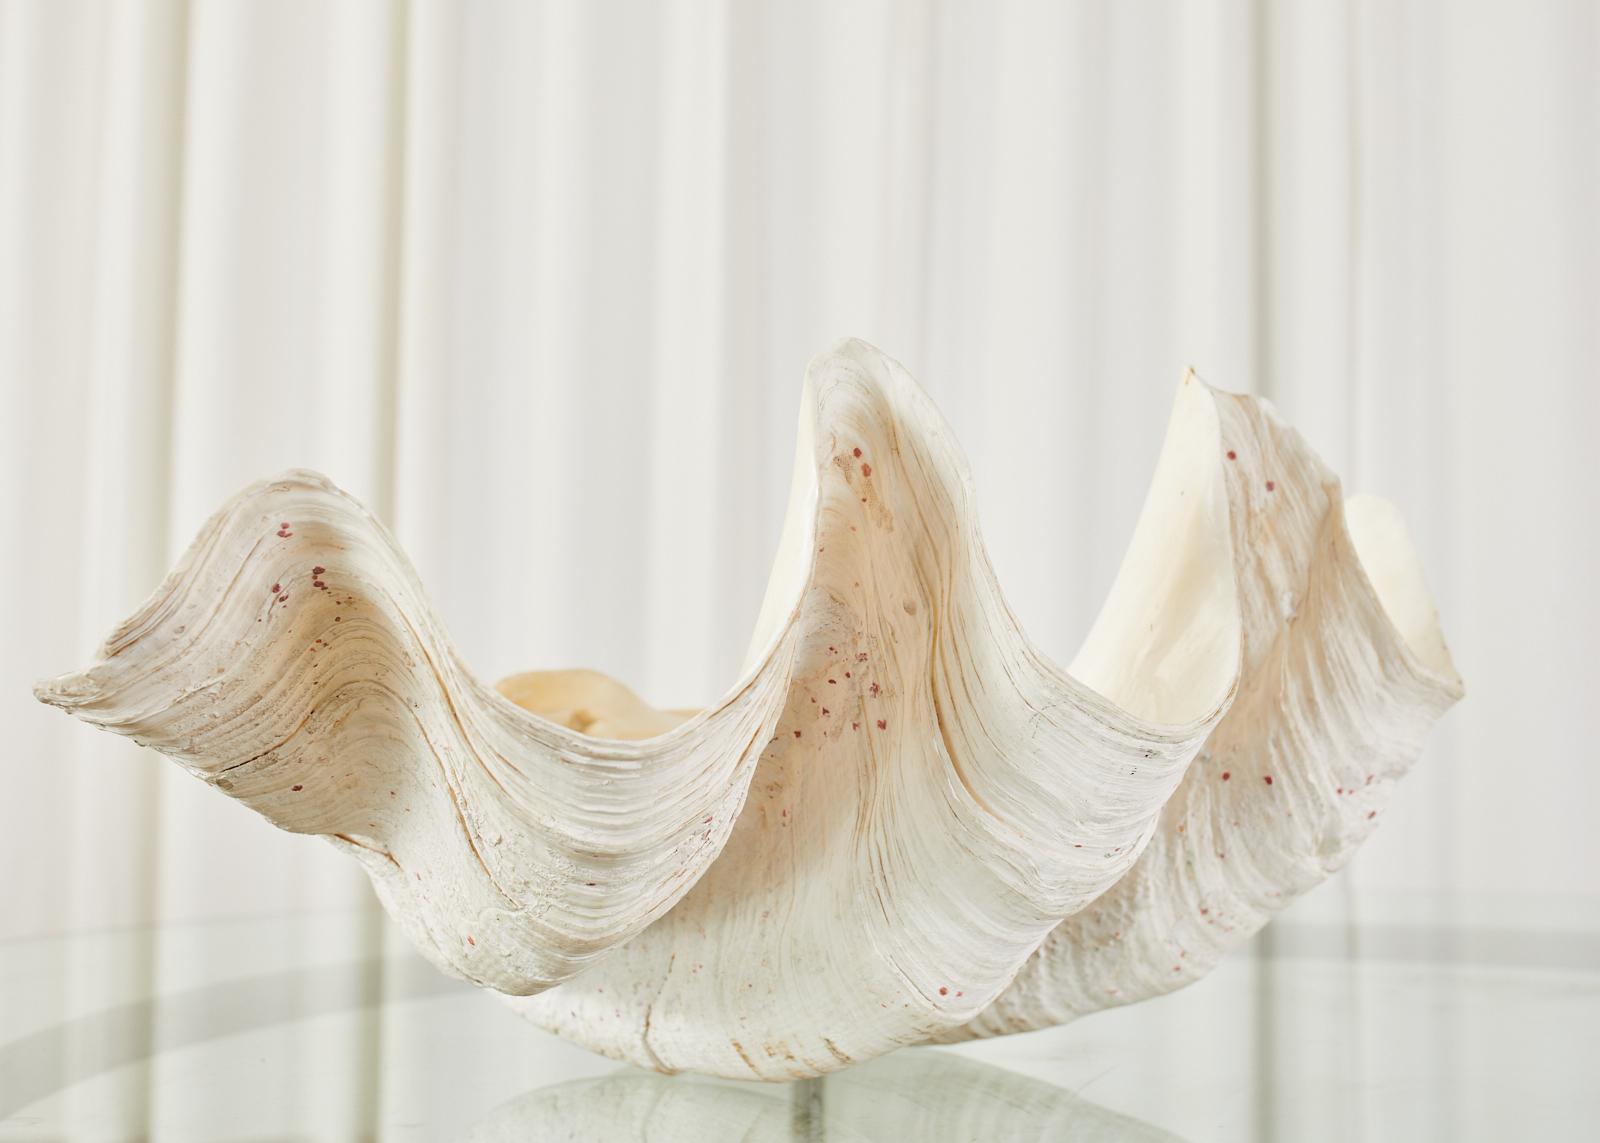 South Pacific Natural Giant Clam Shell Specimen 5